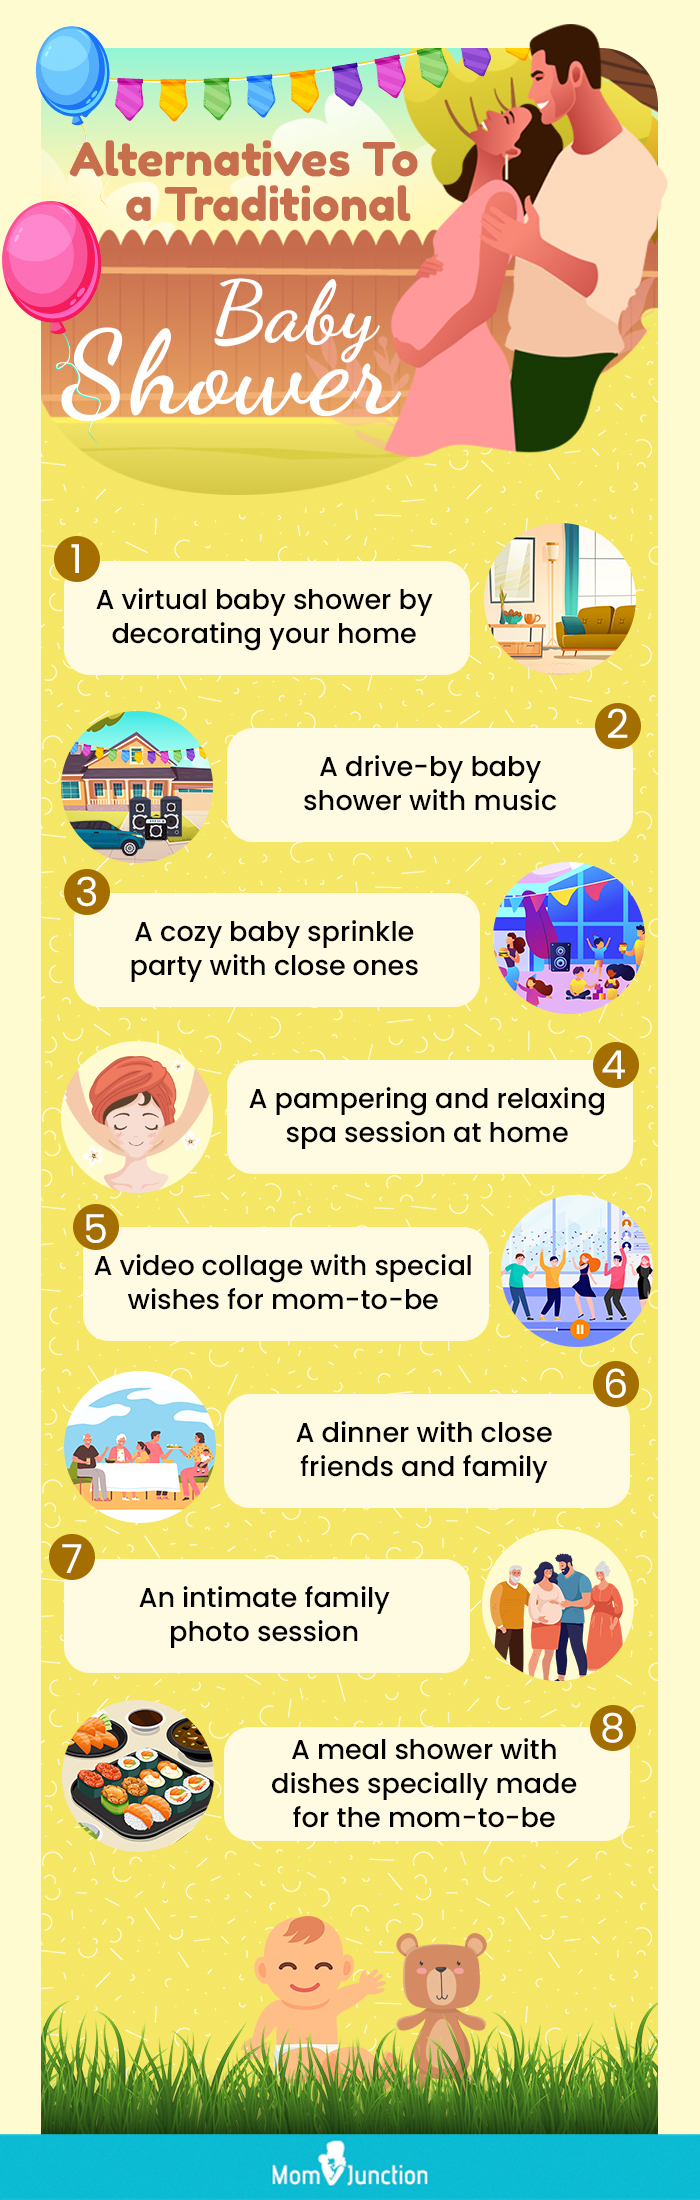 alternatives to a traditional baby shower (infographic)